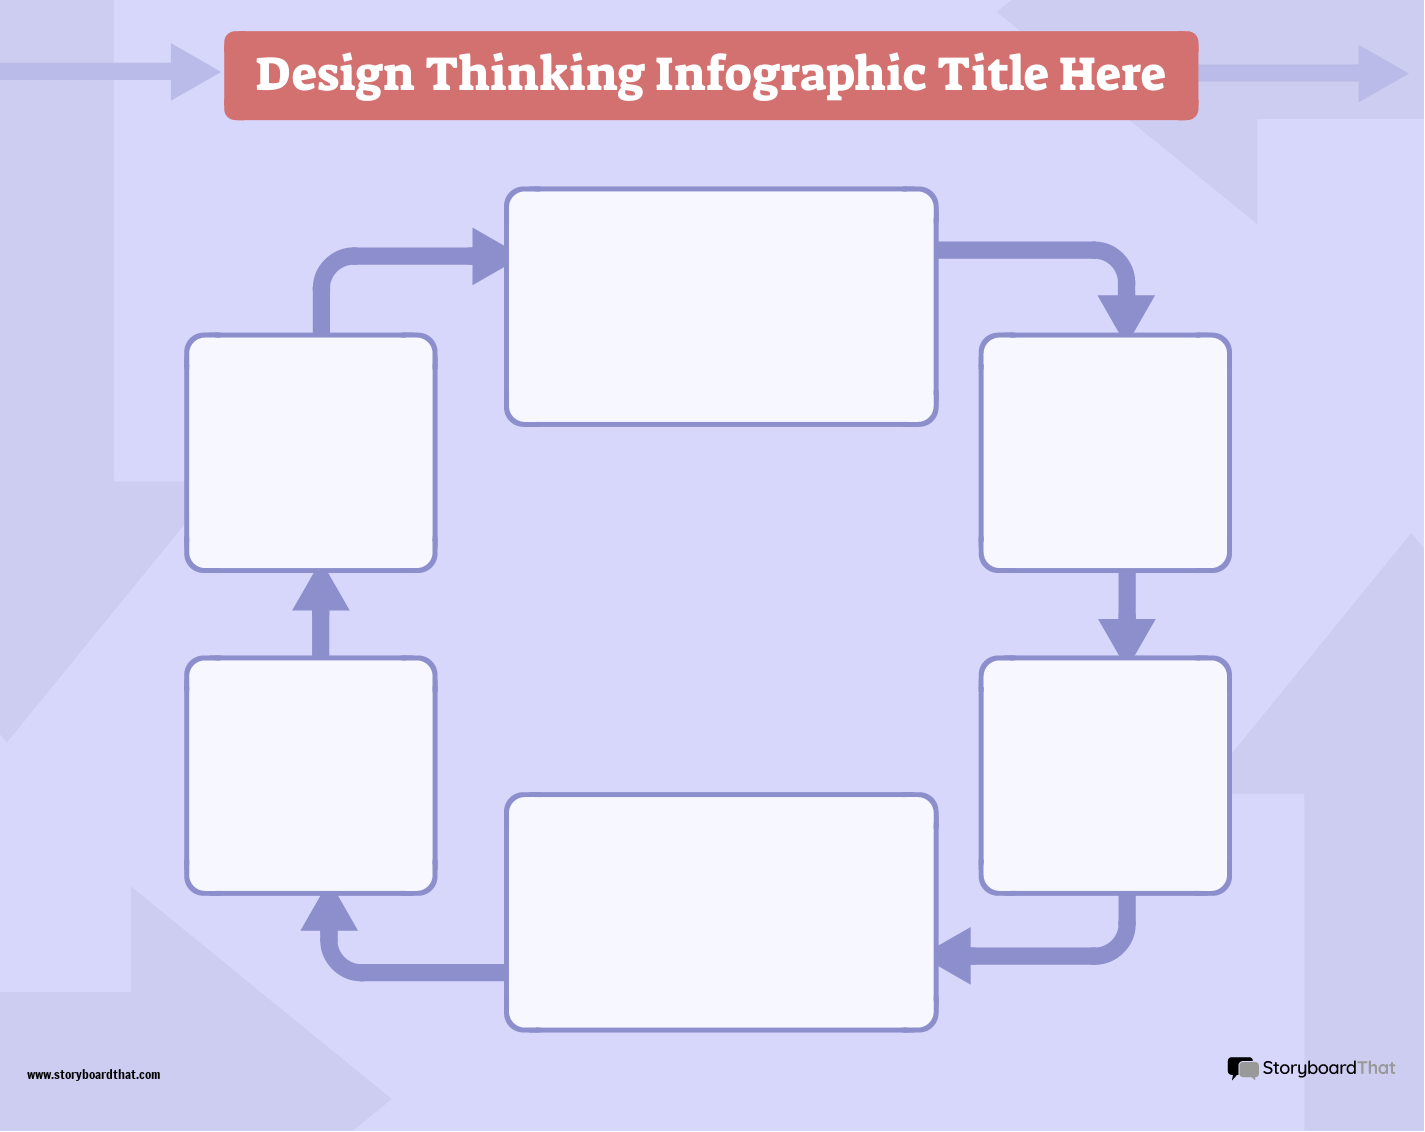 Corporate Design Thinking Infographic Template 1